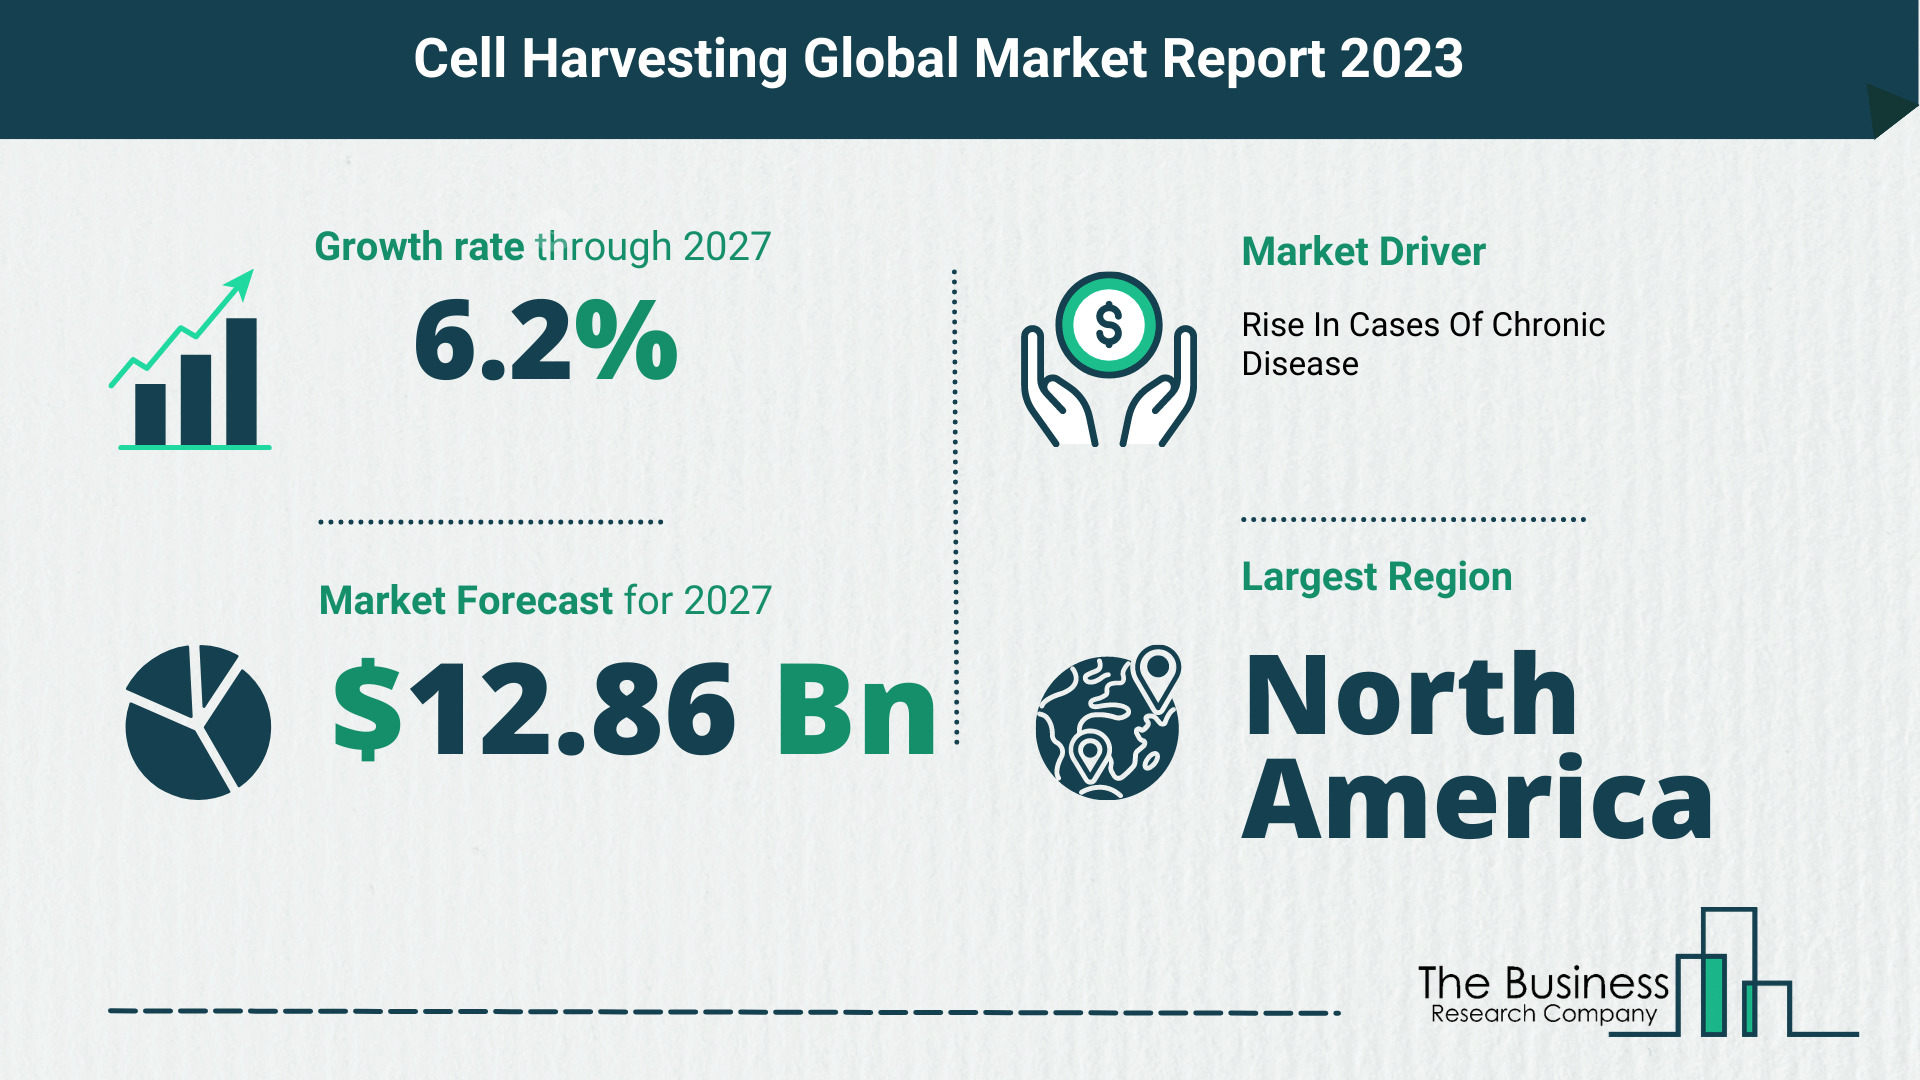 Global Cell Harvesting Market Opportunities And Strategies 2023